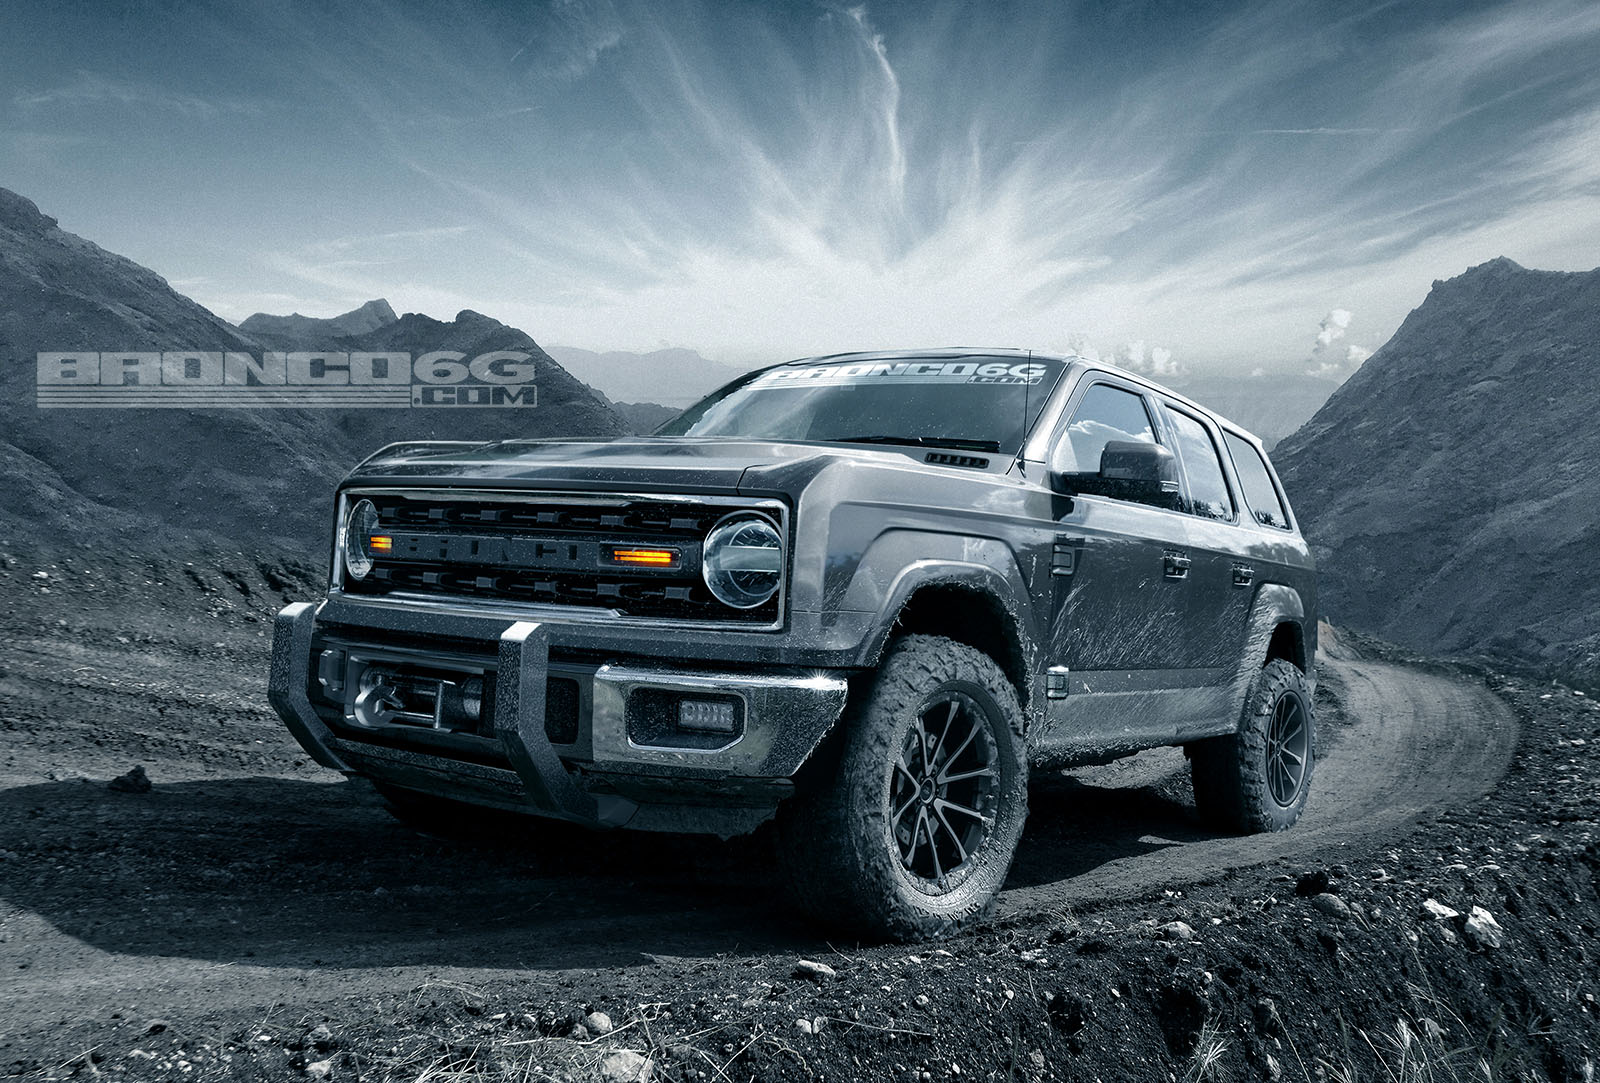 2020 Ford Bronco To Get 325 HP 2.7L EcoBoost V6 According ...